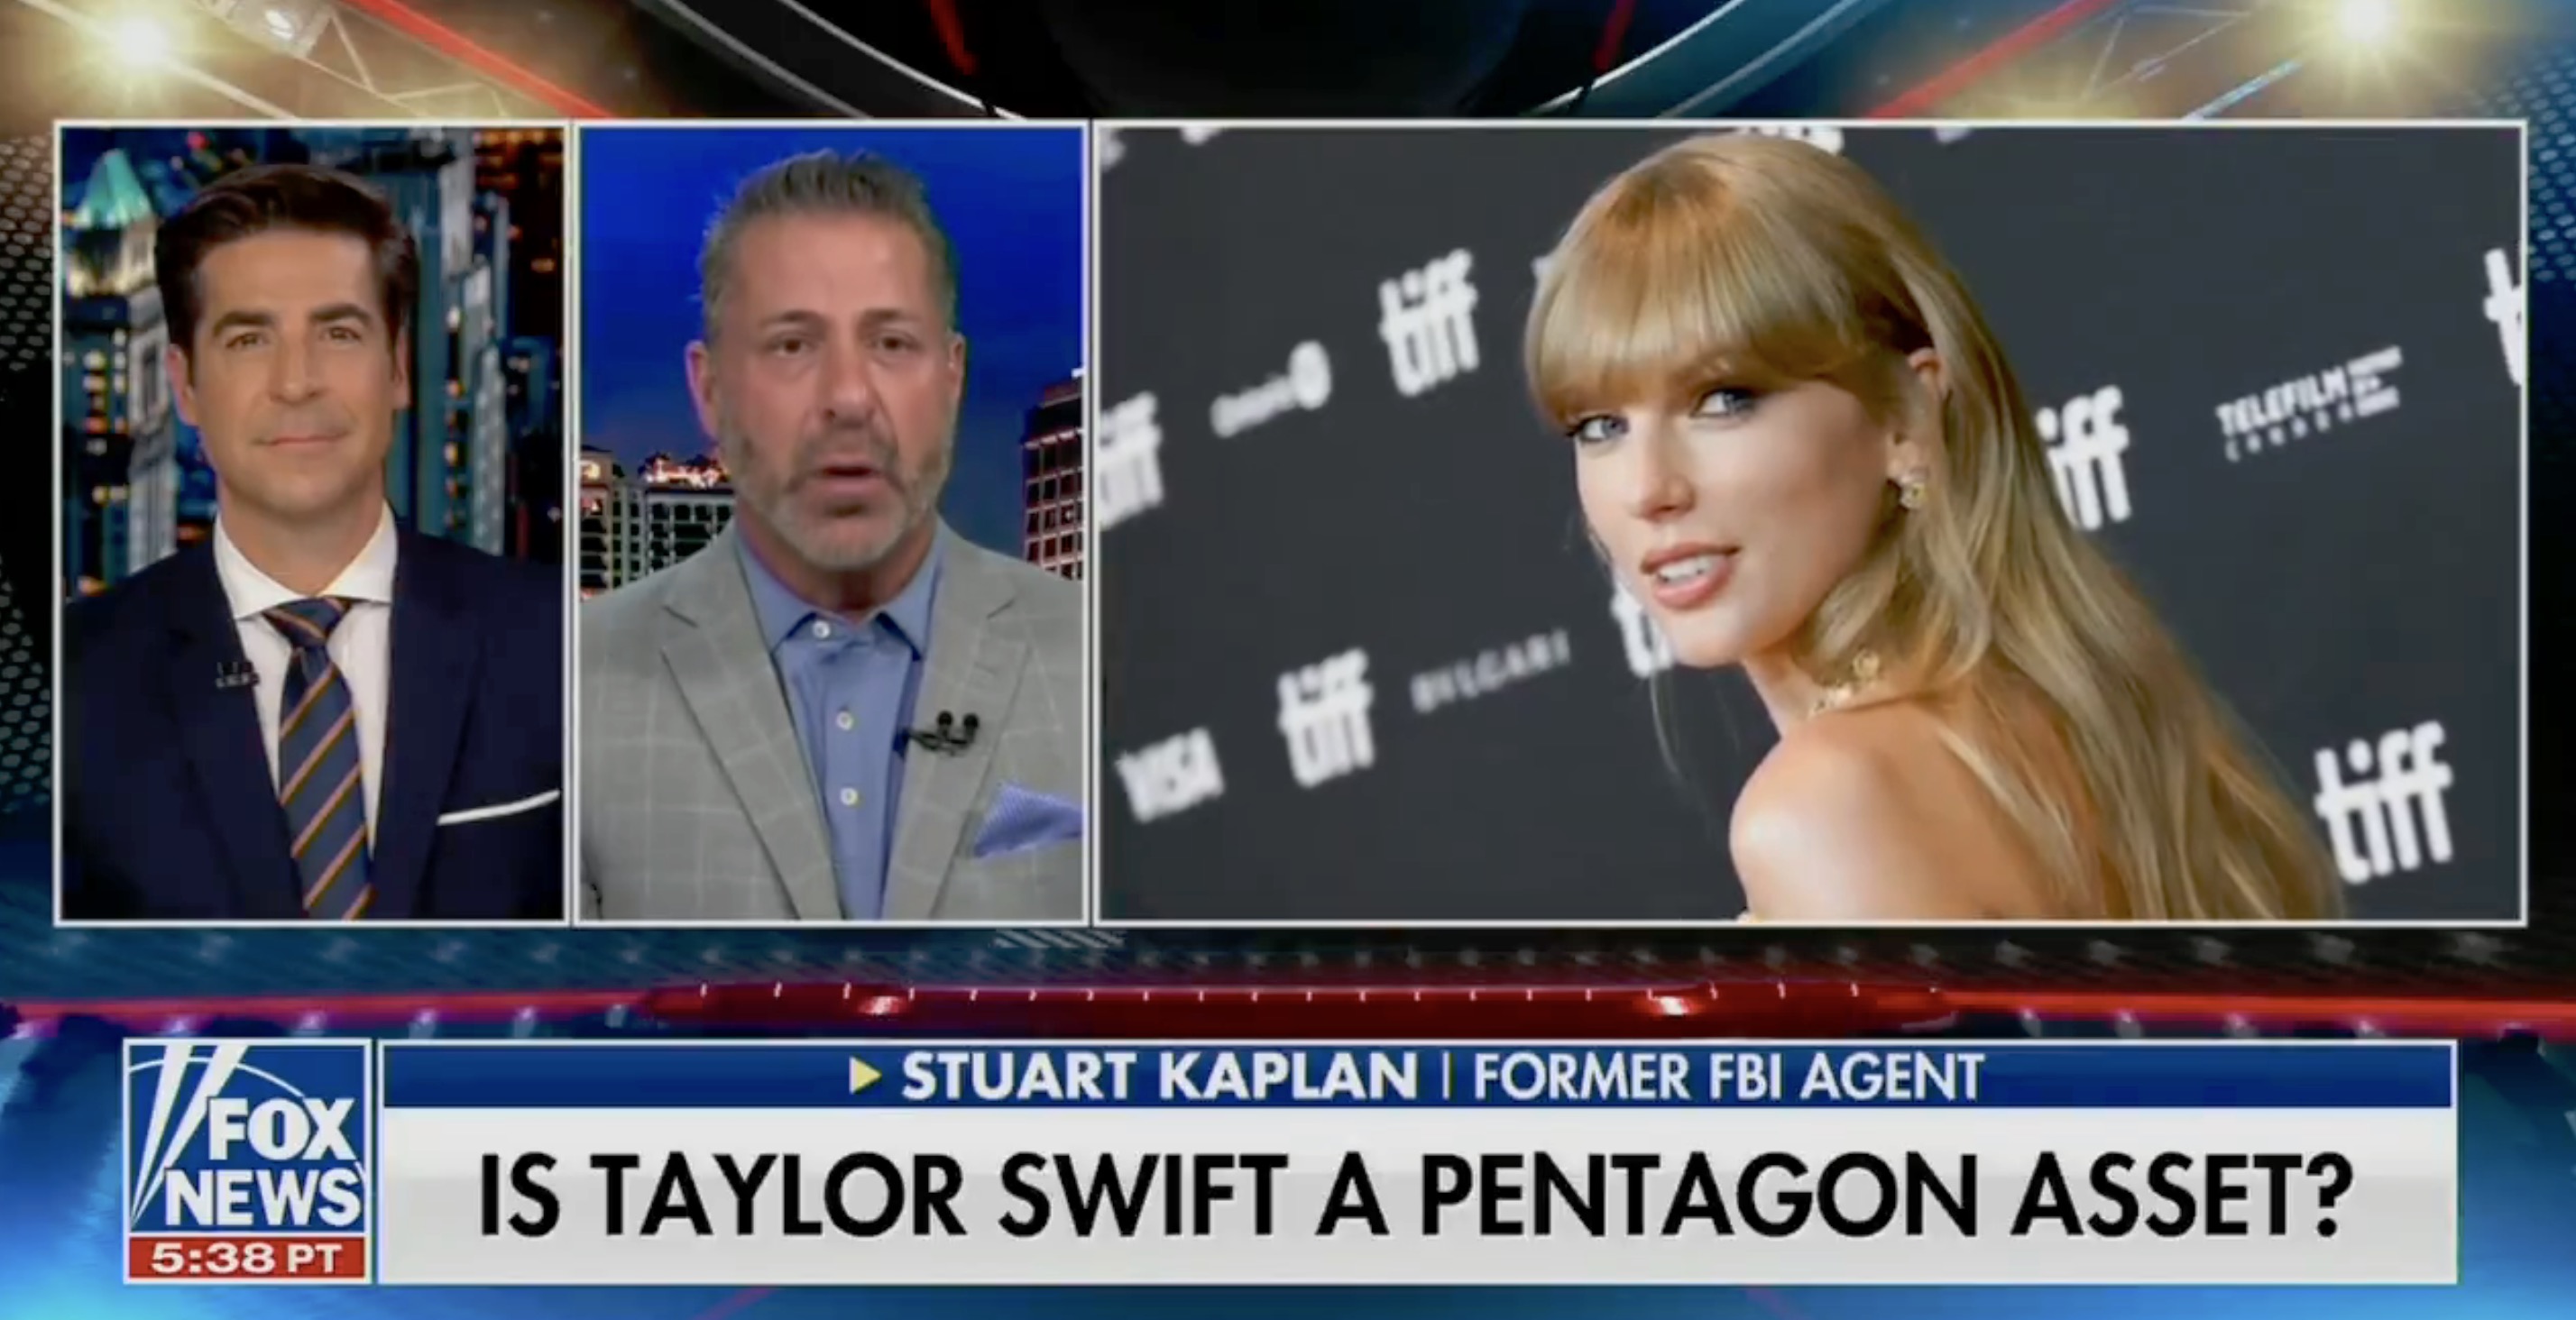 Fox News Casually Floated A Wild Conspiracy Theory About Taylor Swift